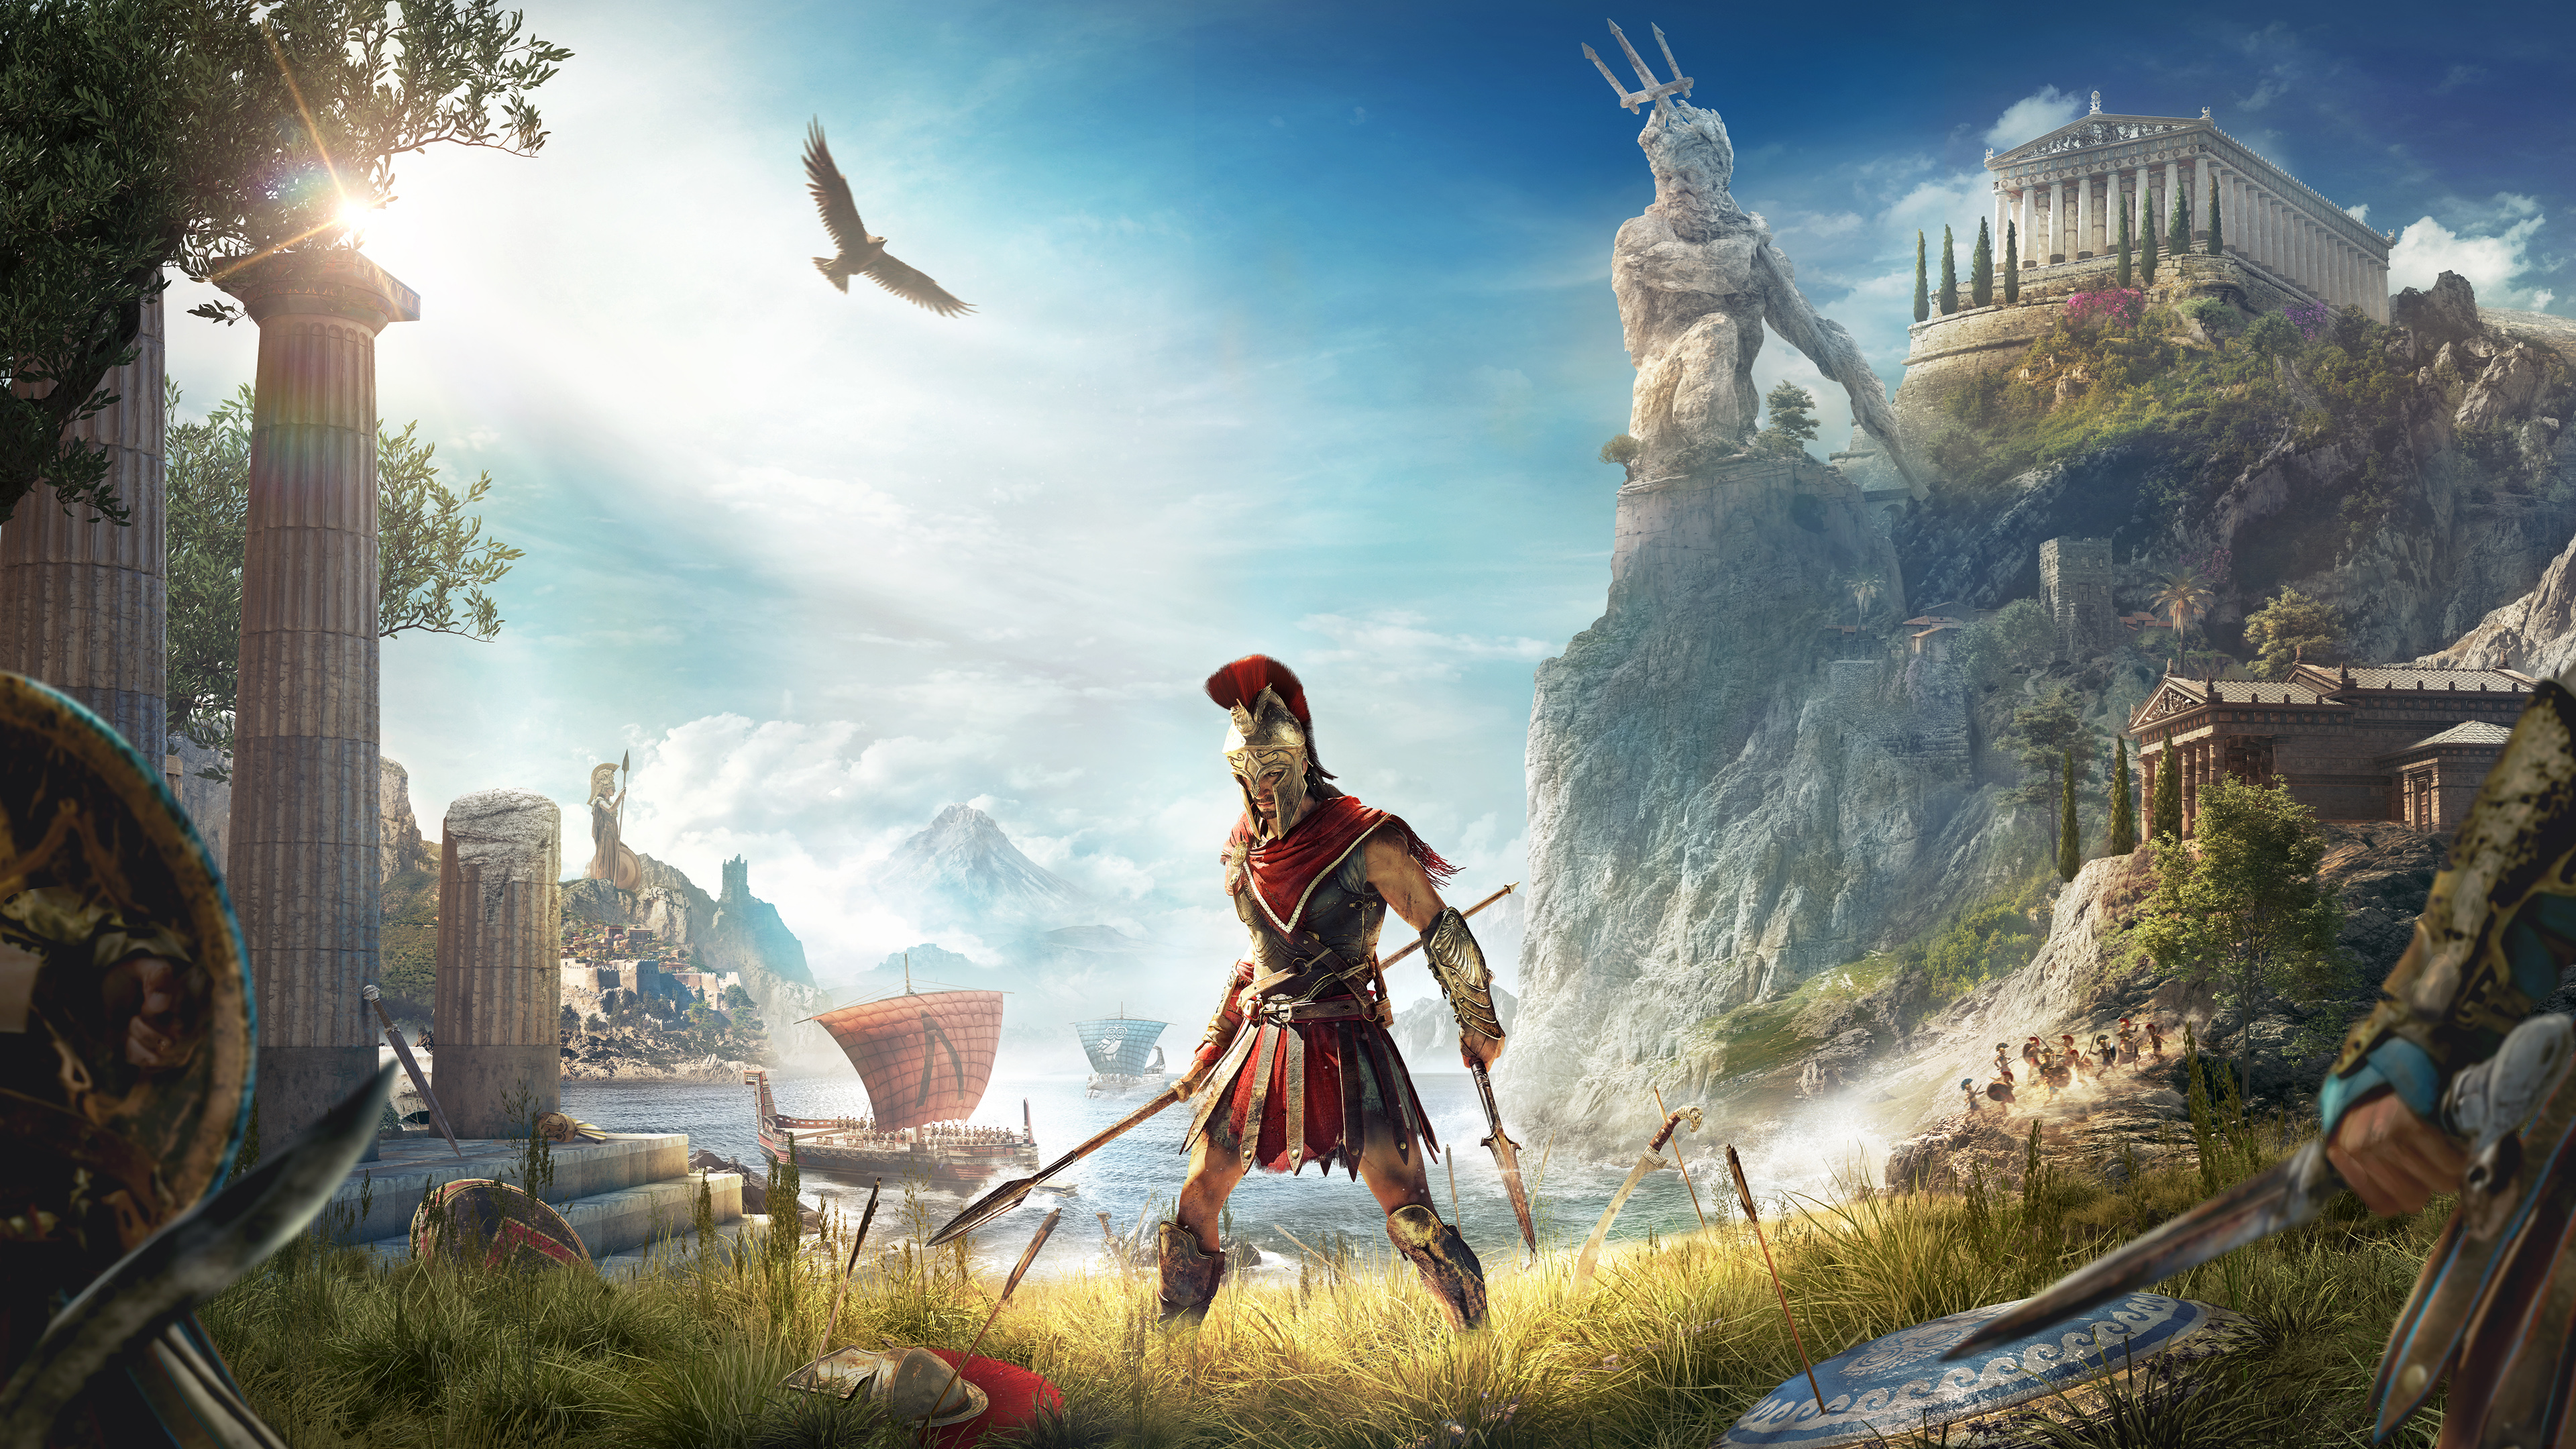 Assassins Creed Odyssey 2018 4k, HD Games, 4k Wallpapers ...